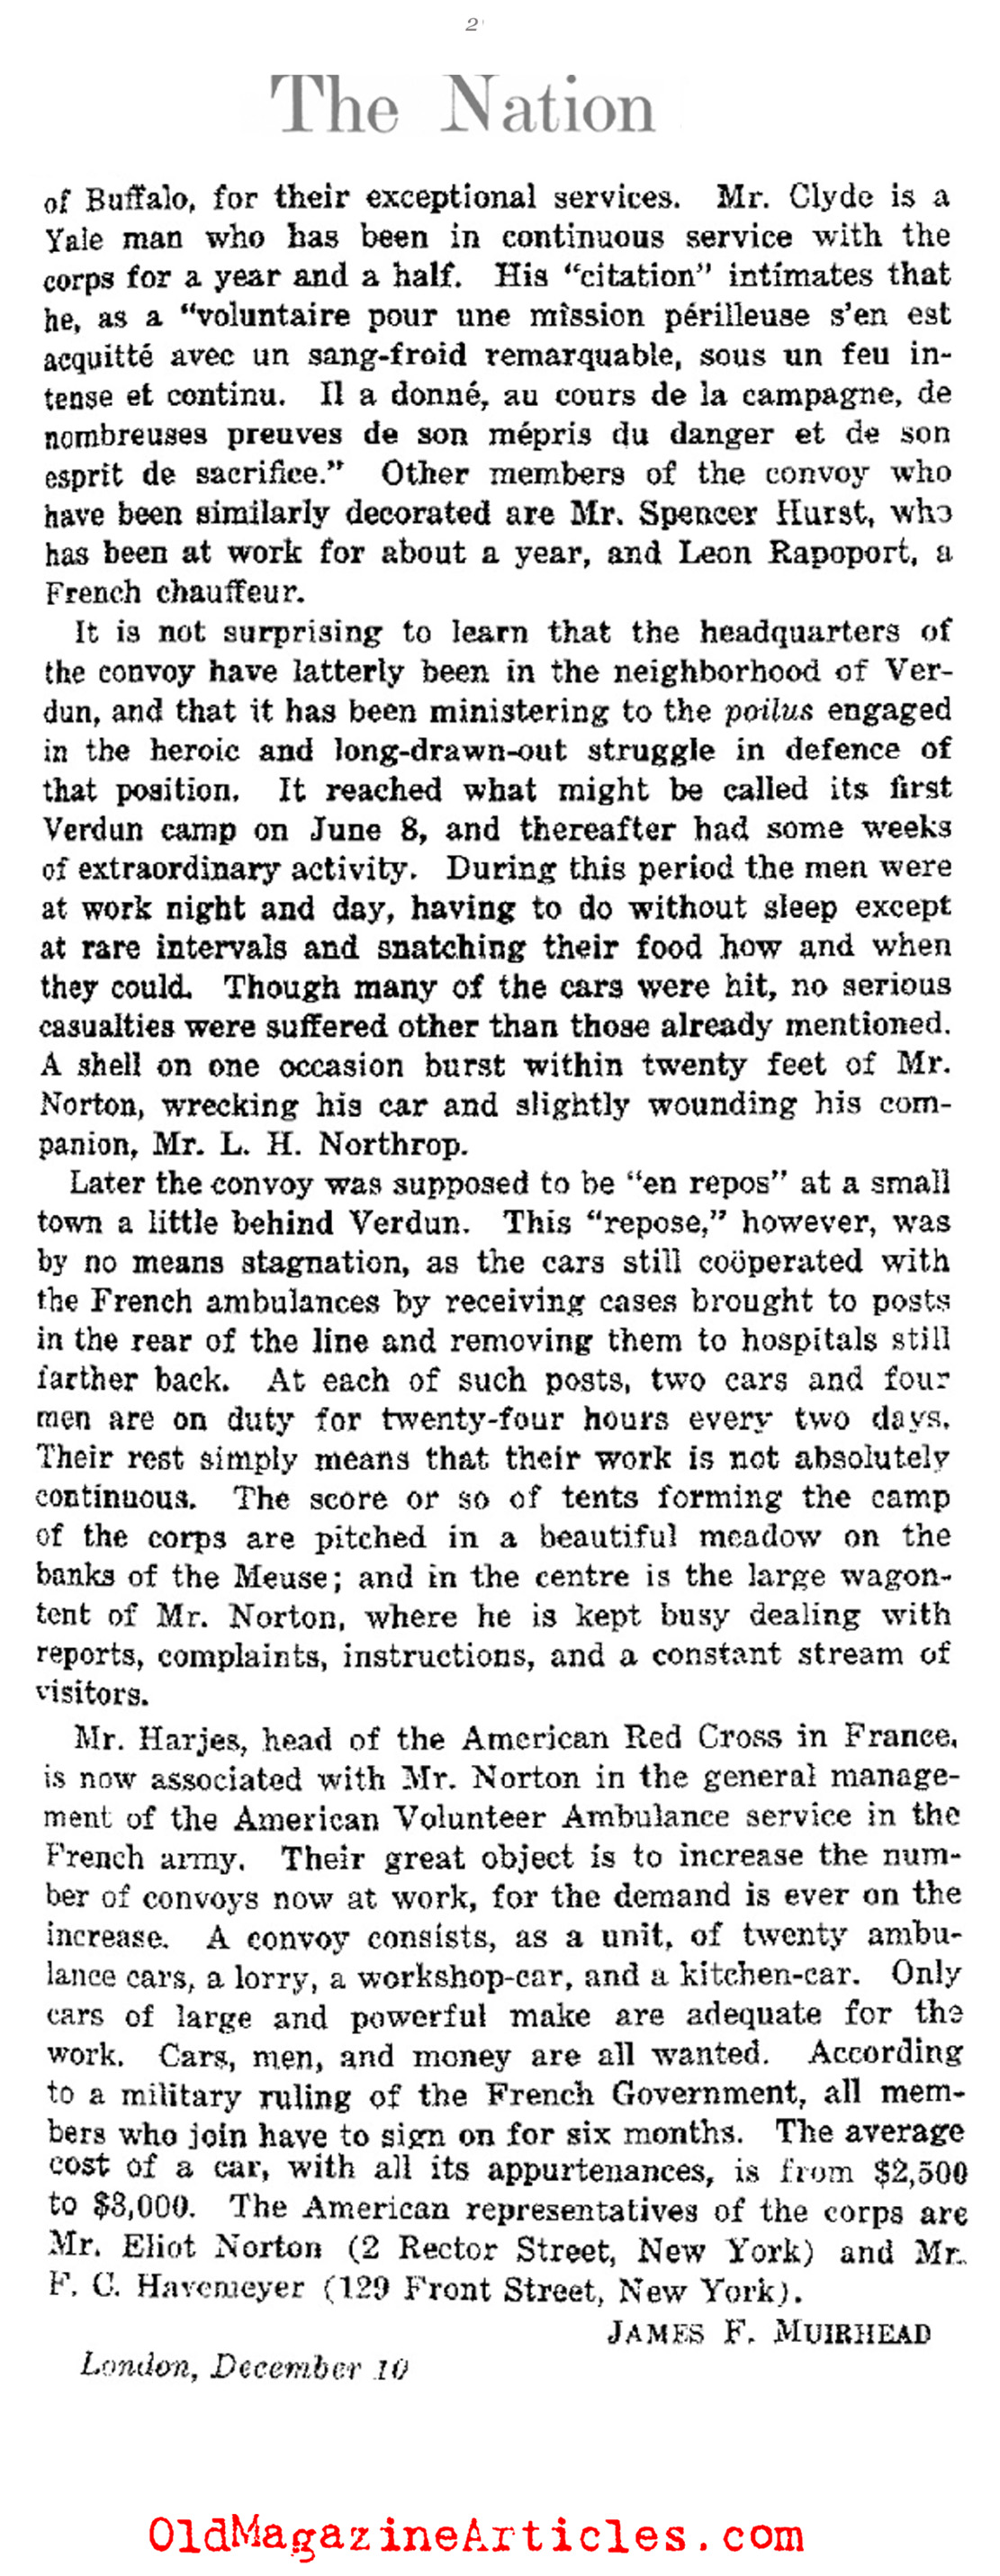 The American Volunteer Ambulance Corps (The Nation, 1917)